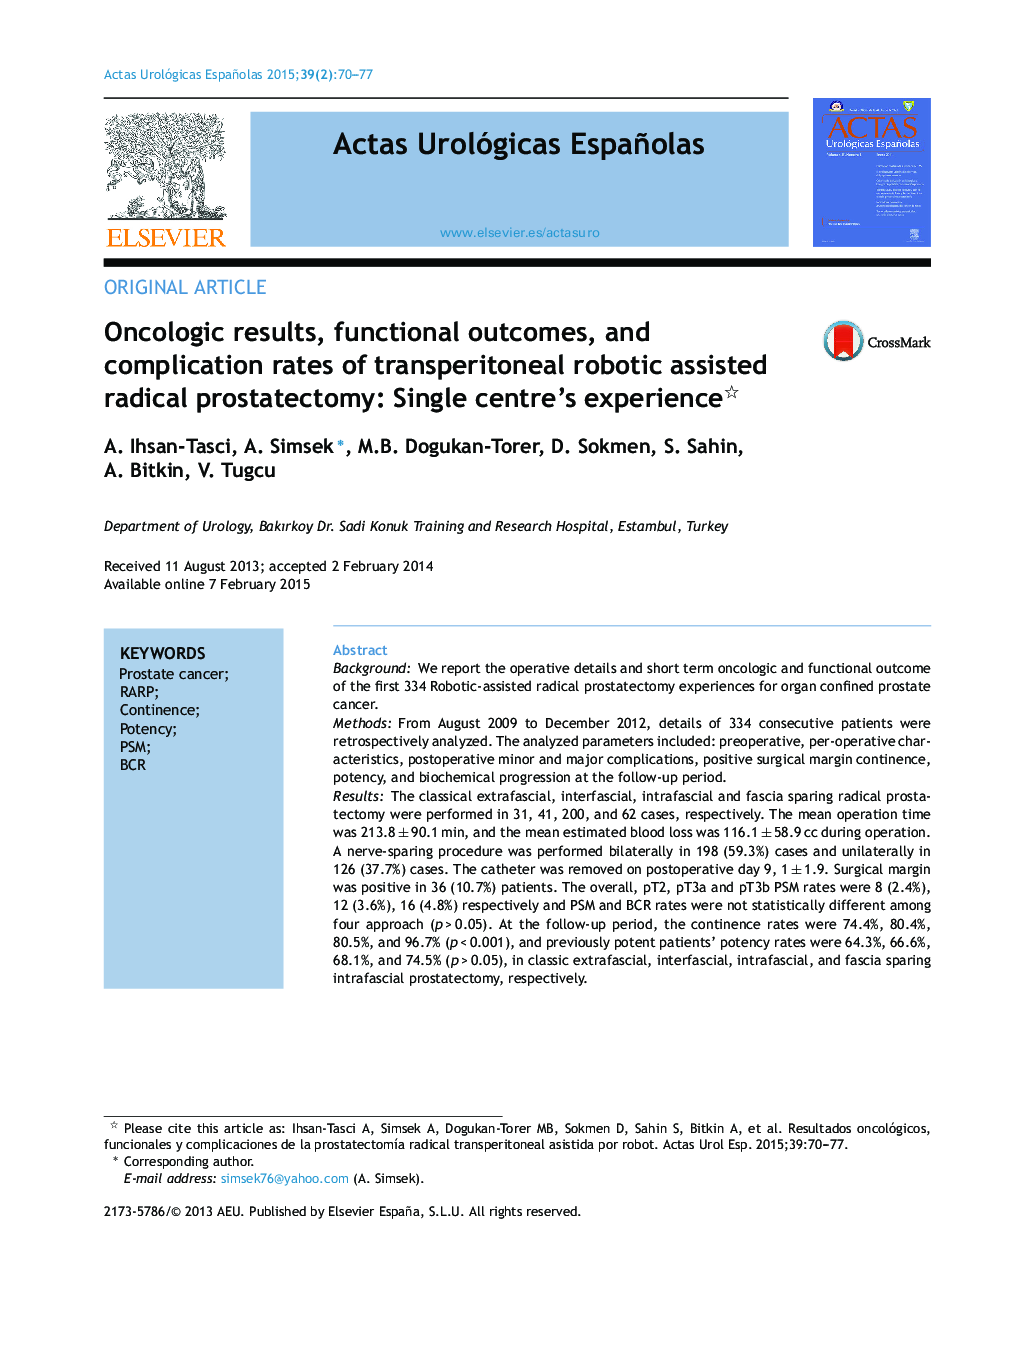 Oncologic results, functional outcomes, and complication rates of transperitoneal robotic assisted radical prostatectomy: Single centre's experience 